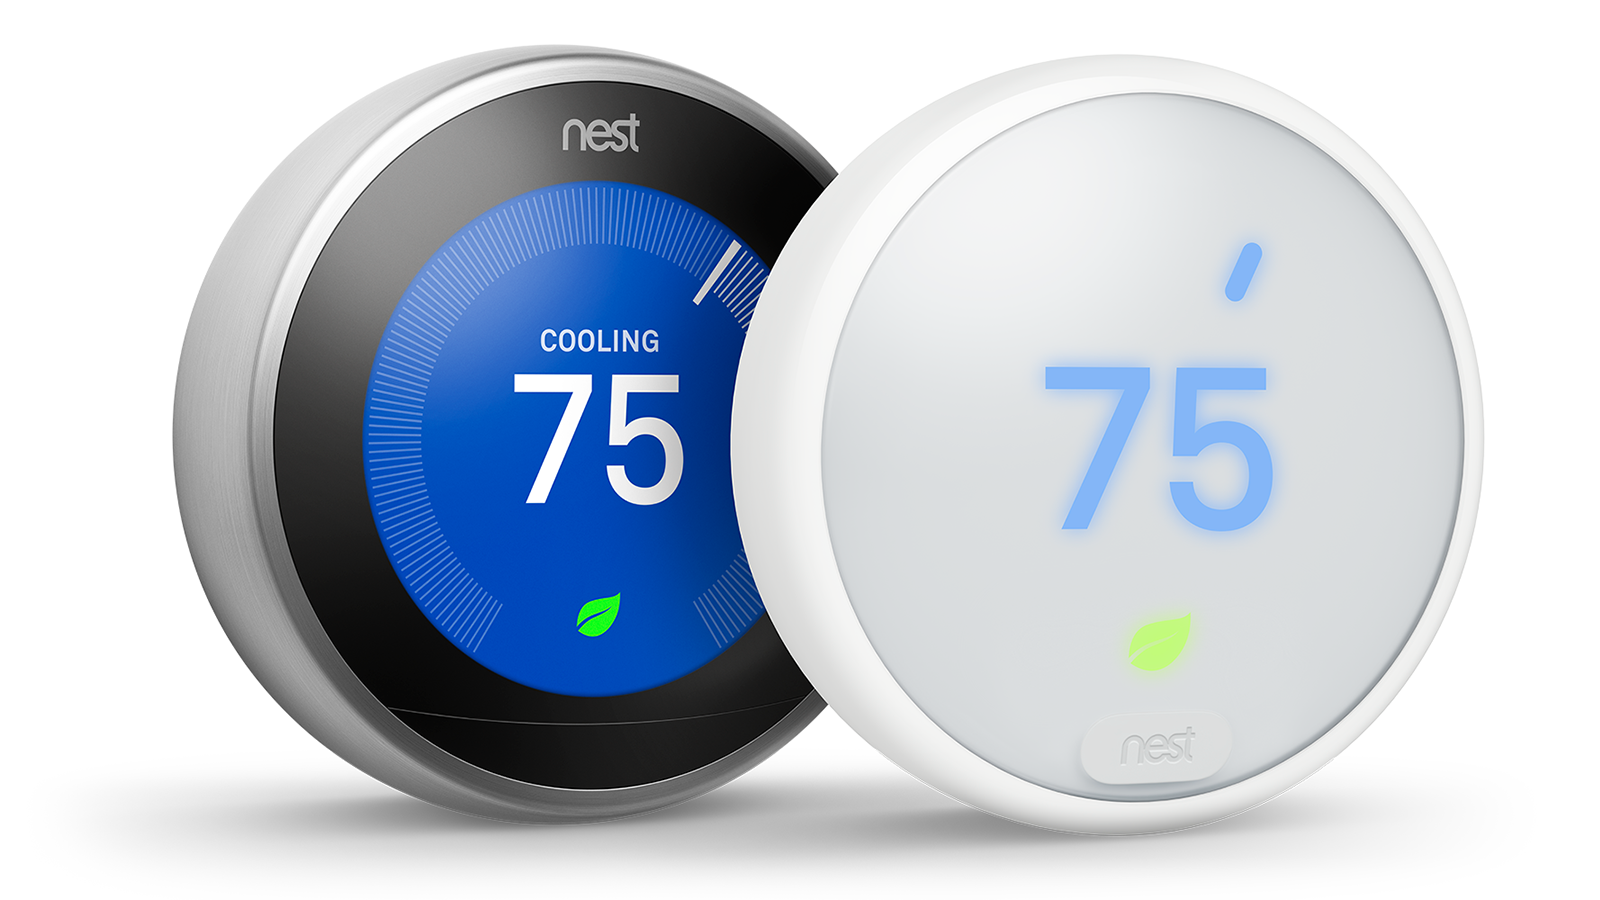 https://developers.google.com/nest/device-access/images/device-thermostat.png